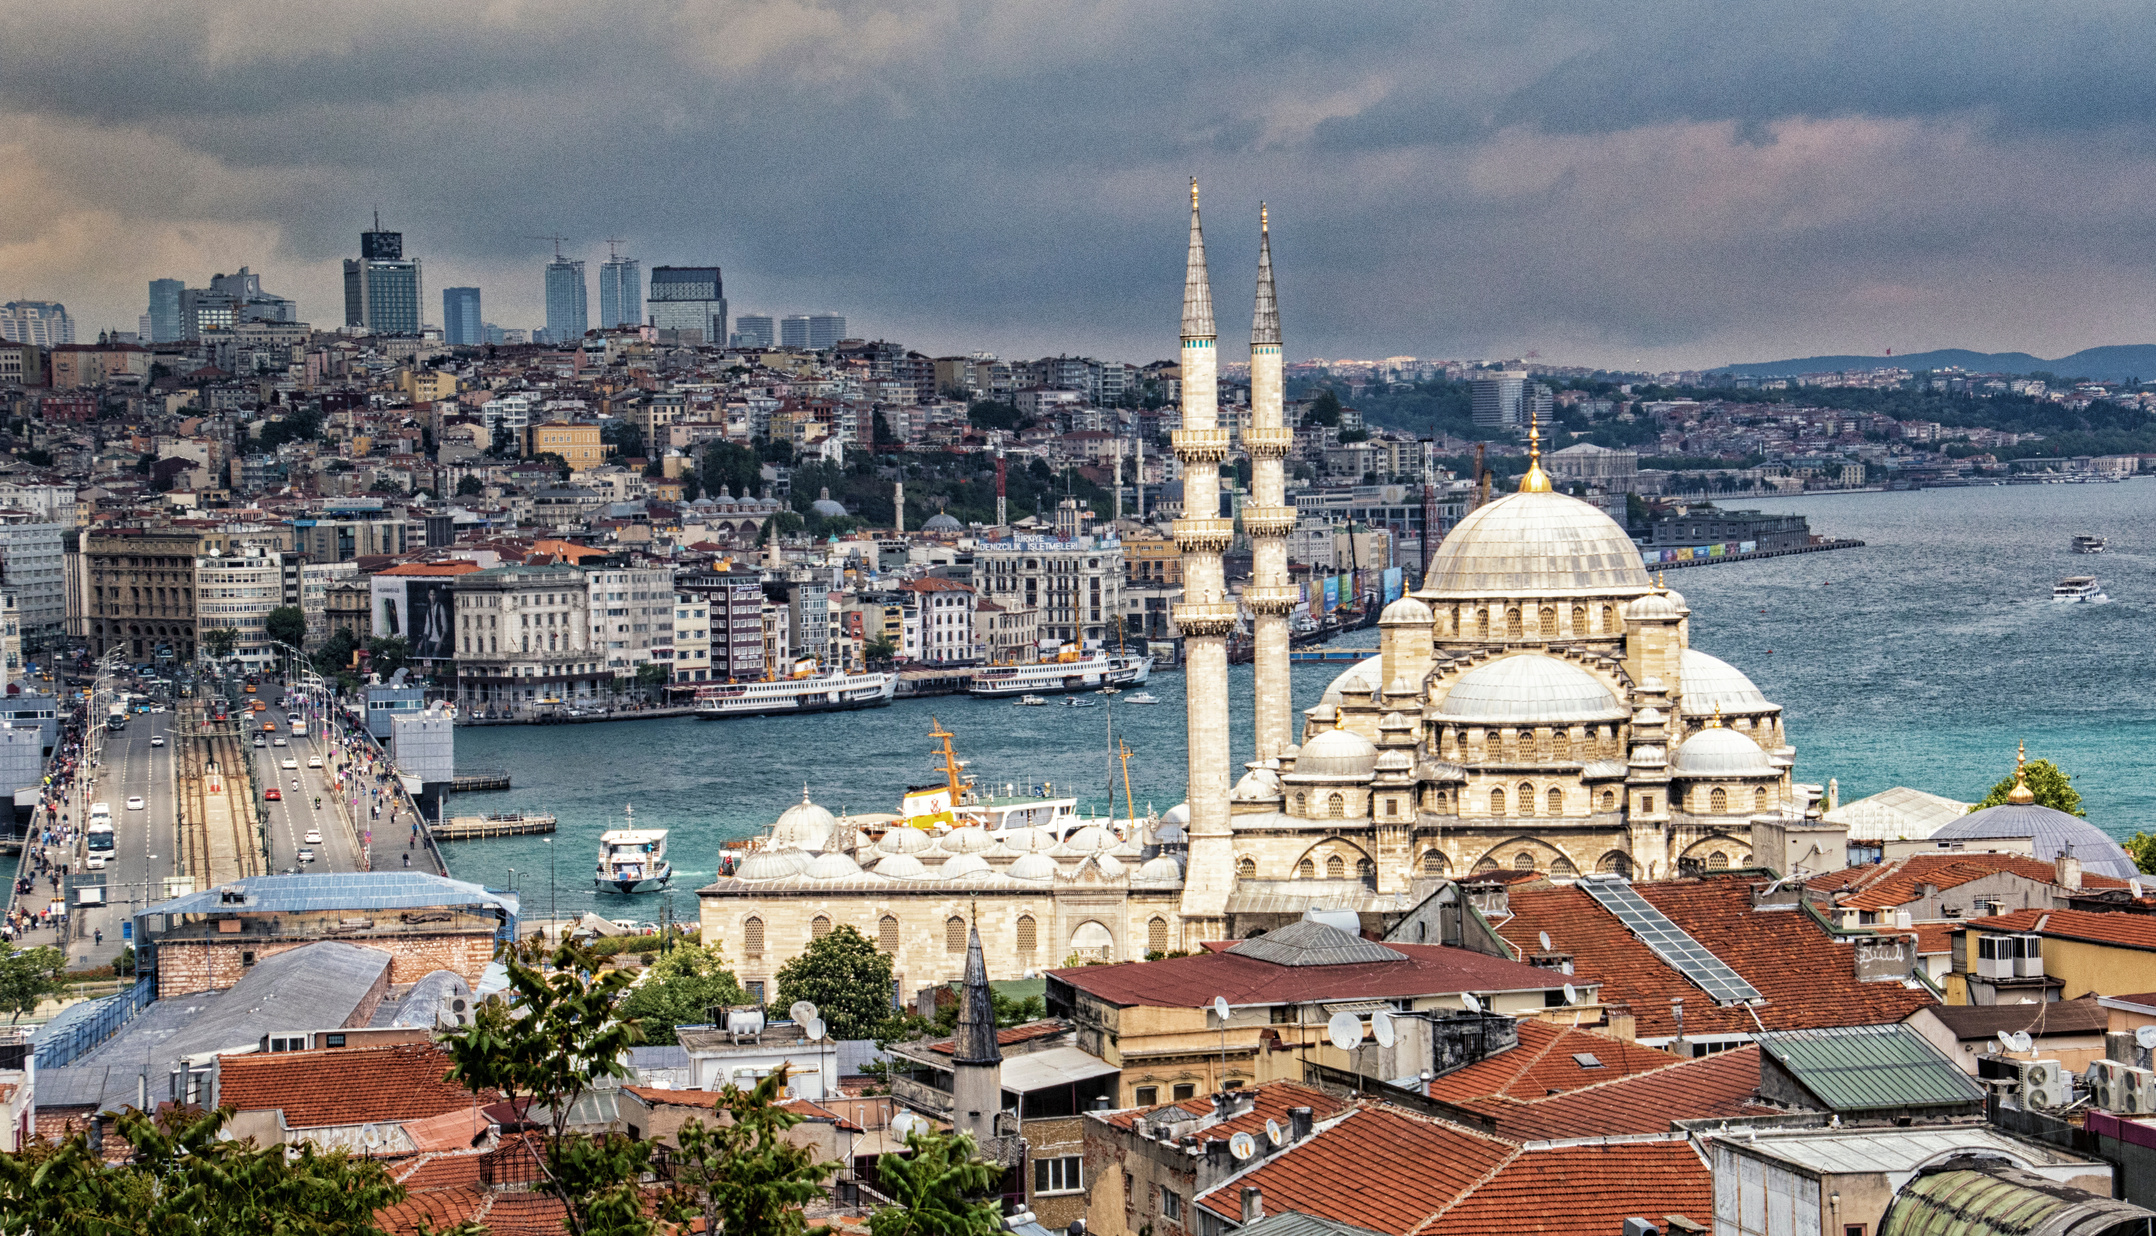 A view of the city of Istanbul from the top of a hill.